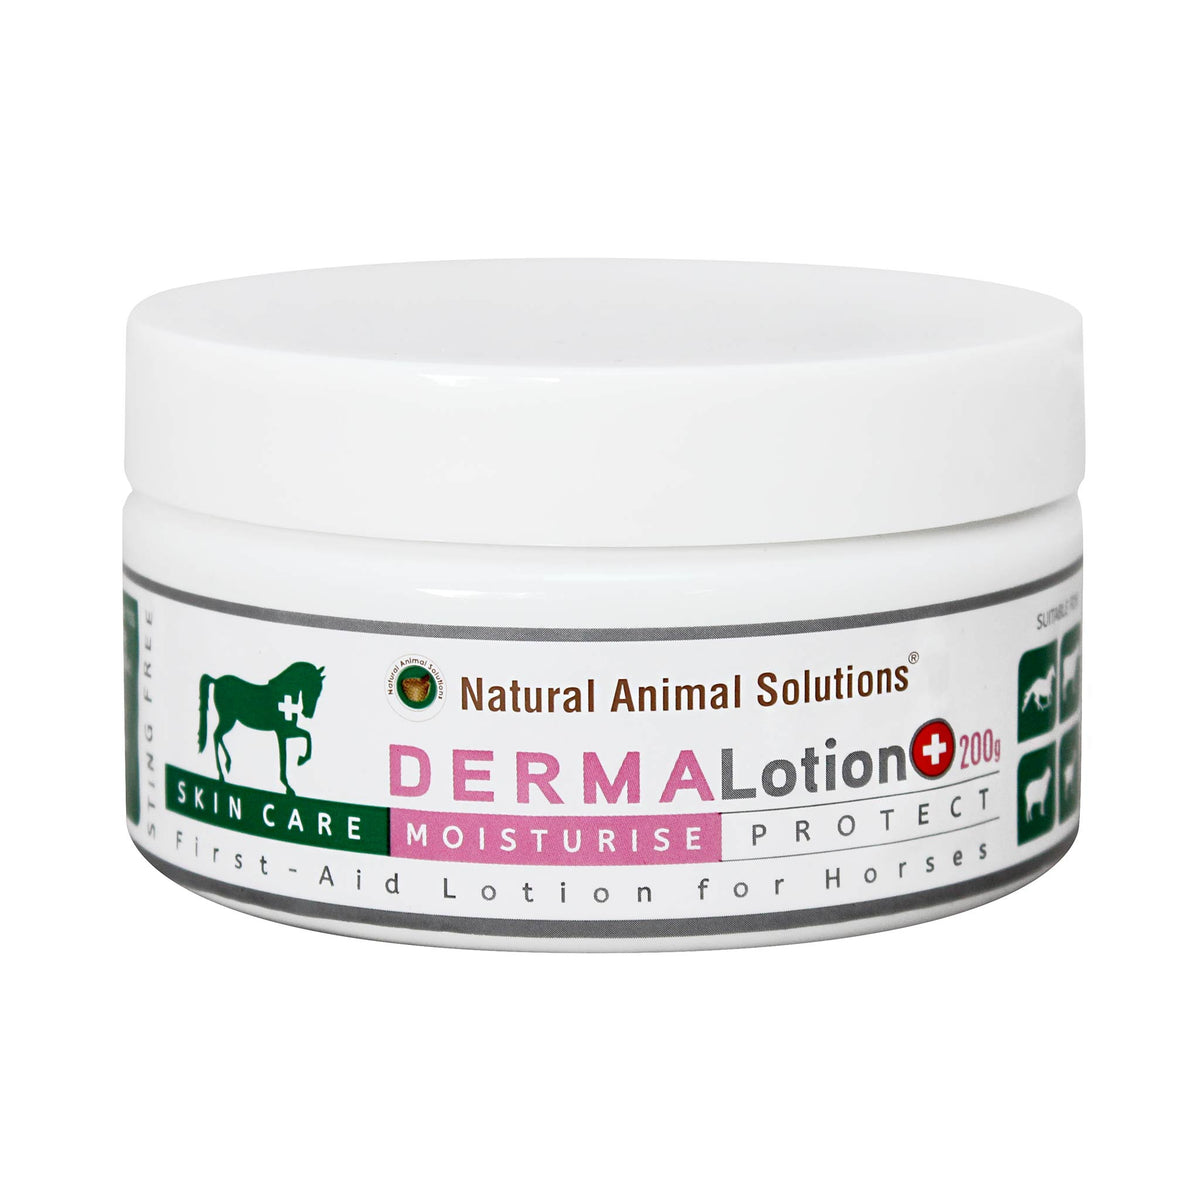 Natural Animal Solutions DermaLotion First Aid Skin Lotion for Horses 200g